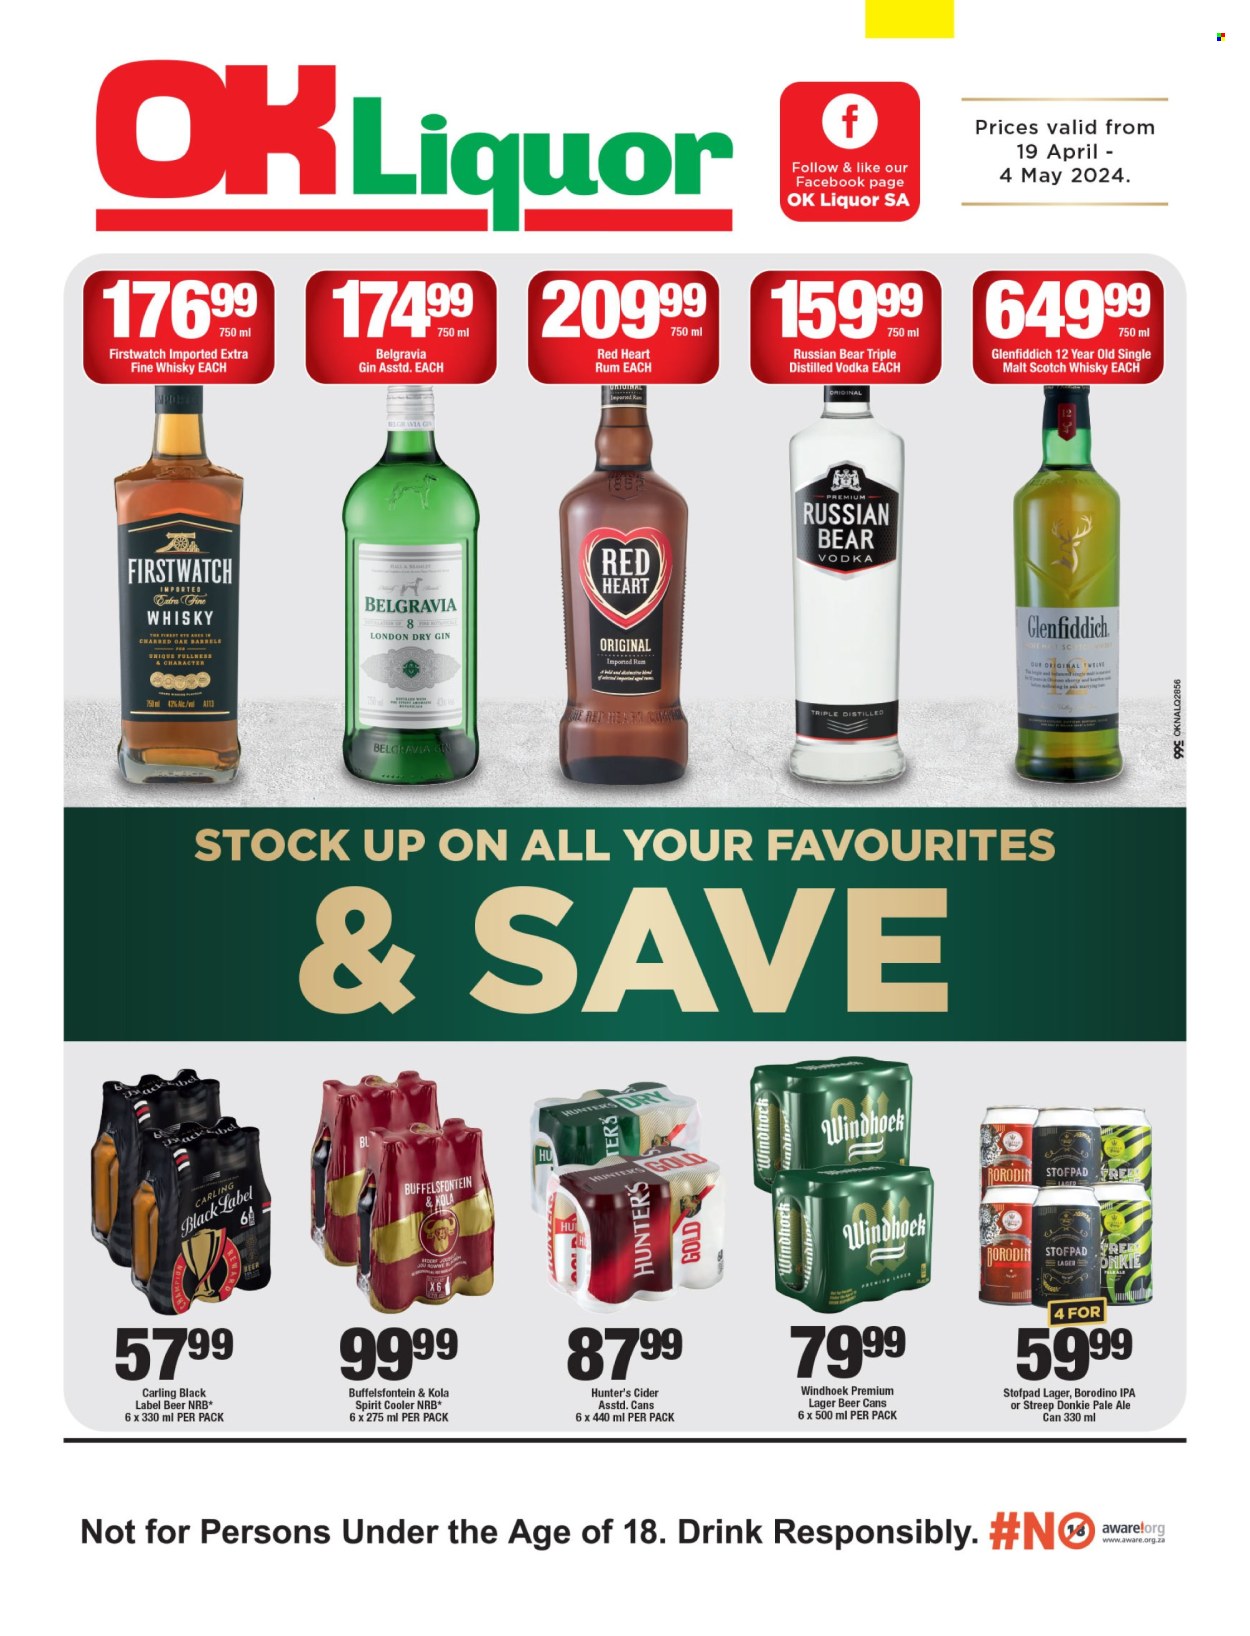 thumbnail - OK catalogue  - 19/04/2024 - 04/05/2024 - Sales products - alcohol, gin, liqueur, rum, vodka, liquor, Russian Bear, Glenfiddich, Red Heart, Belgravia, Buffelsfontein, scotch whisky, whisky, cider, spirit, beer, Carling, Lager, IPA. Page 1.